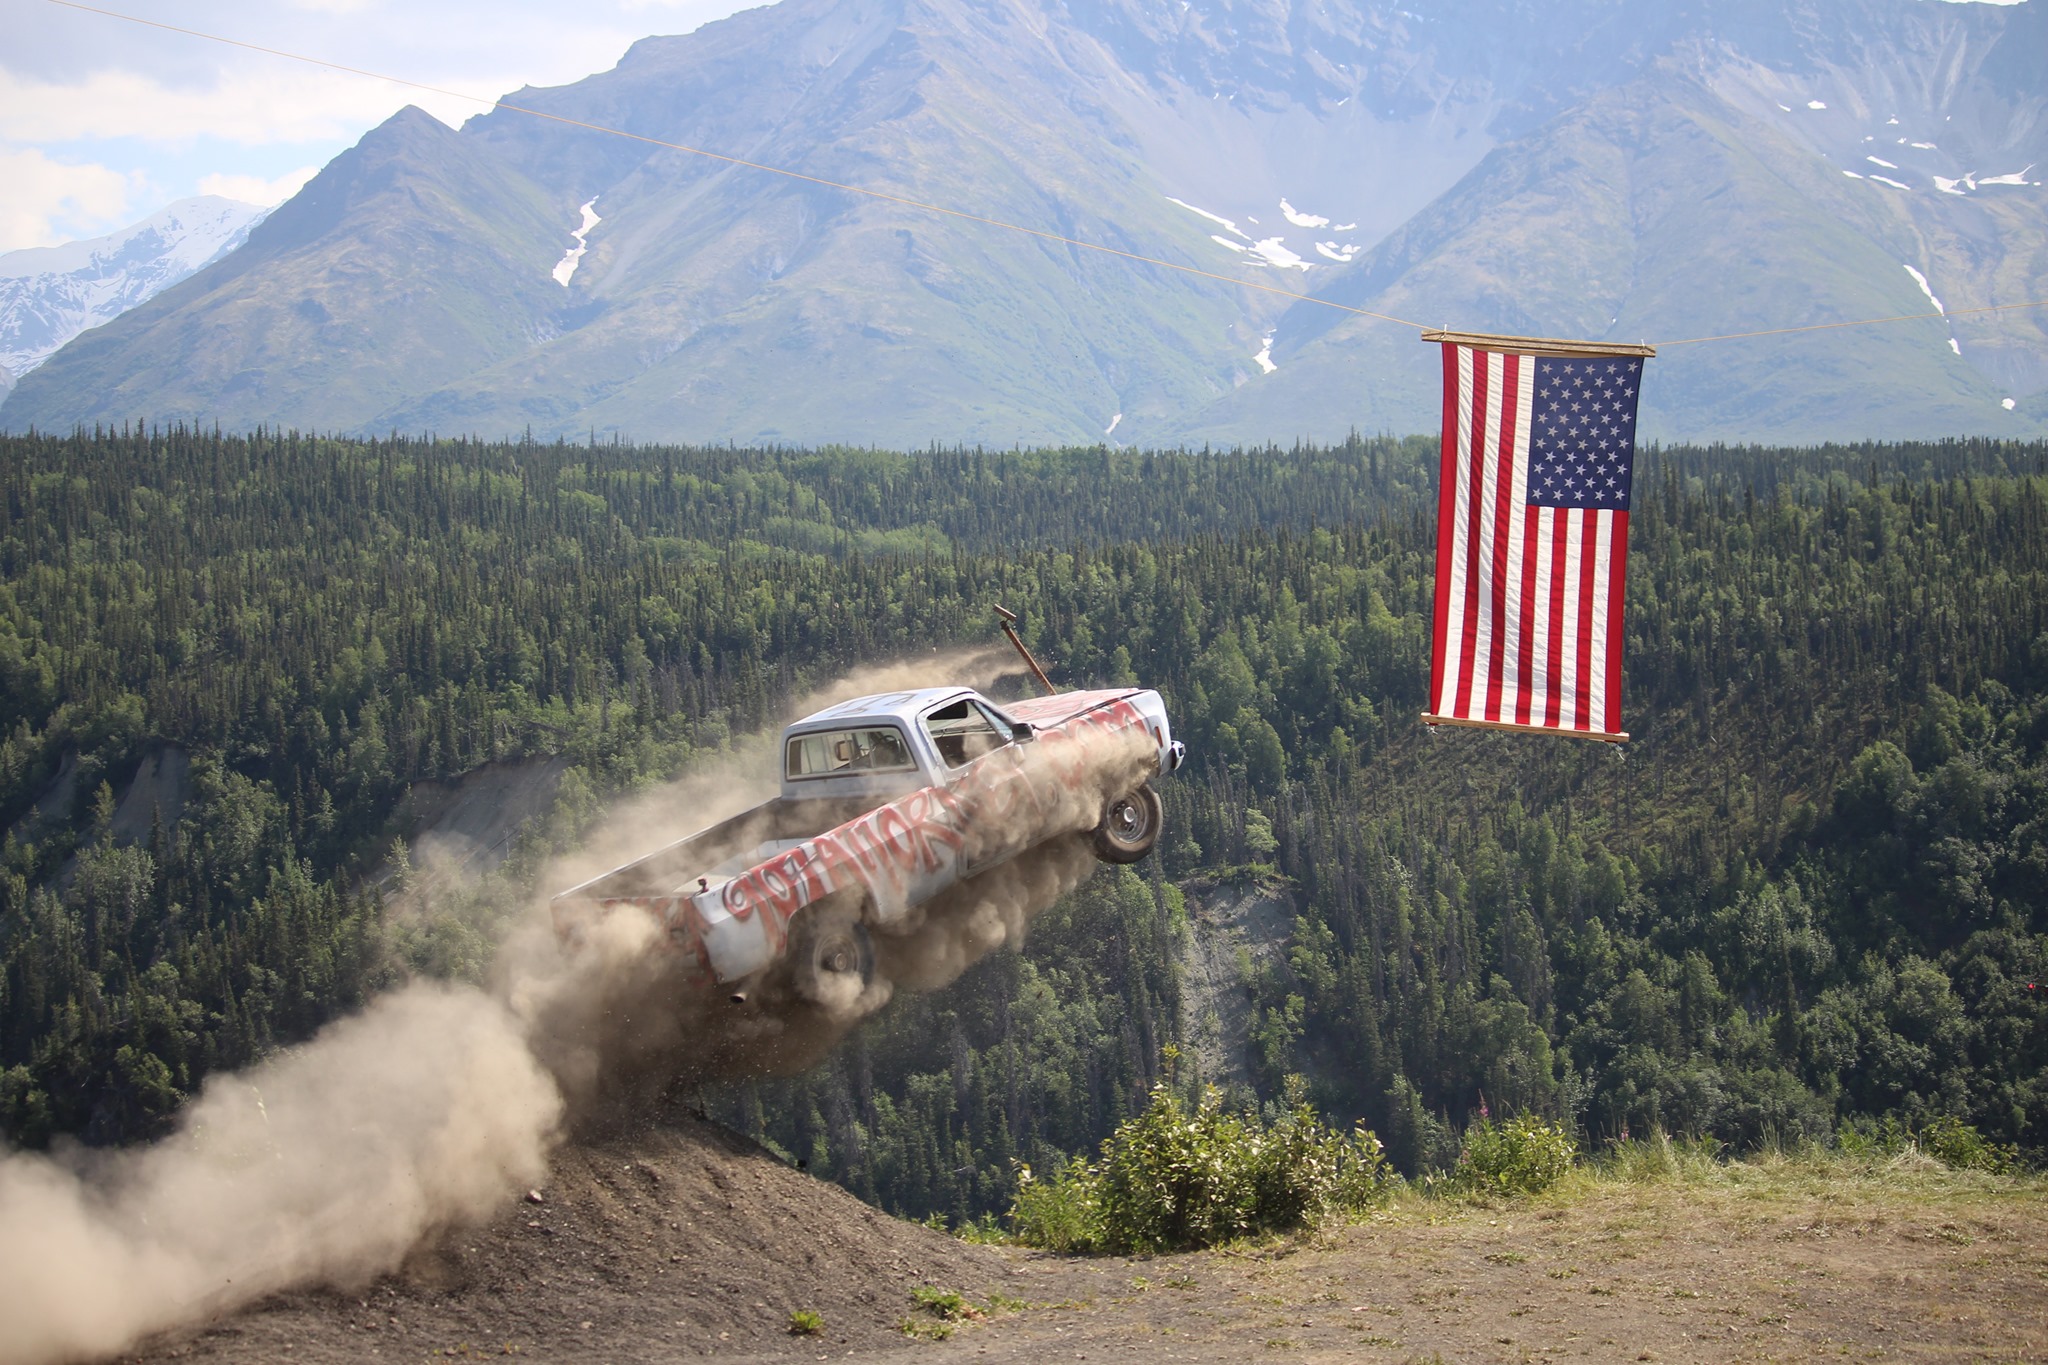 4th of July - Launching Cars off a Cliff - God Bless America